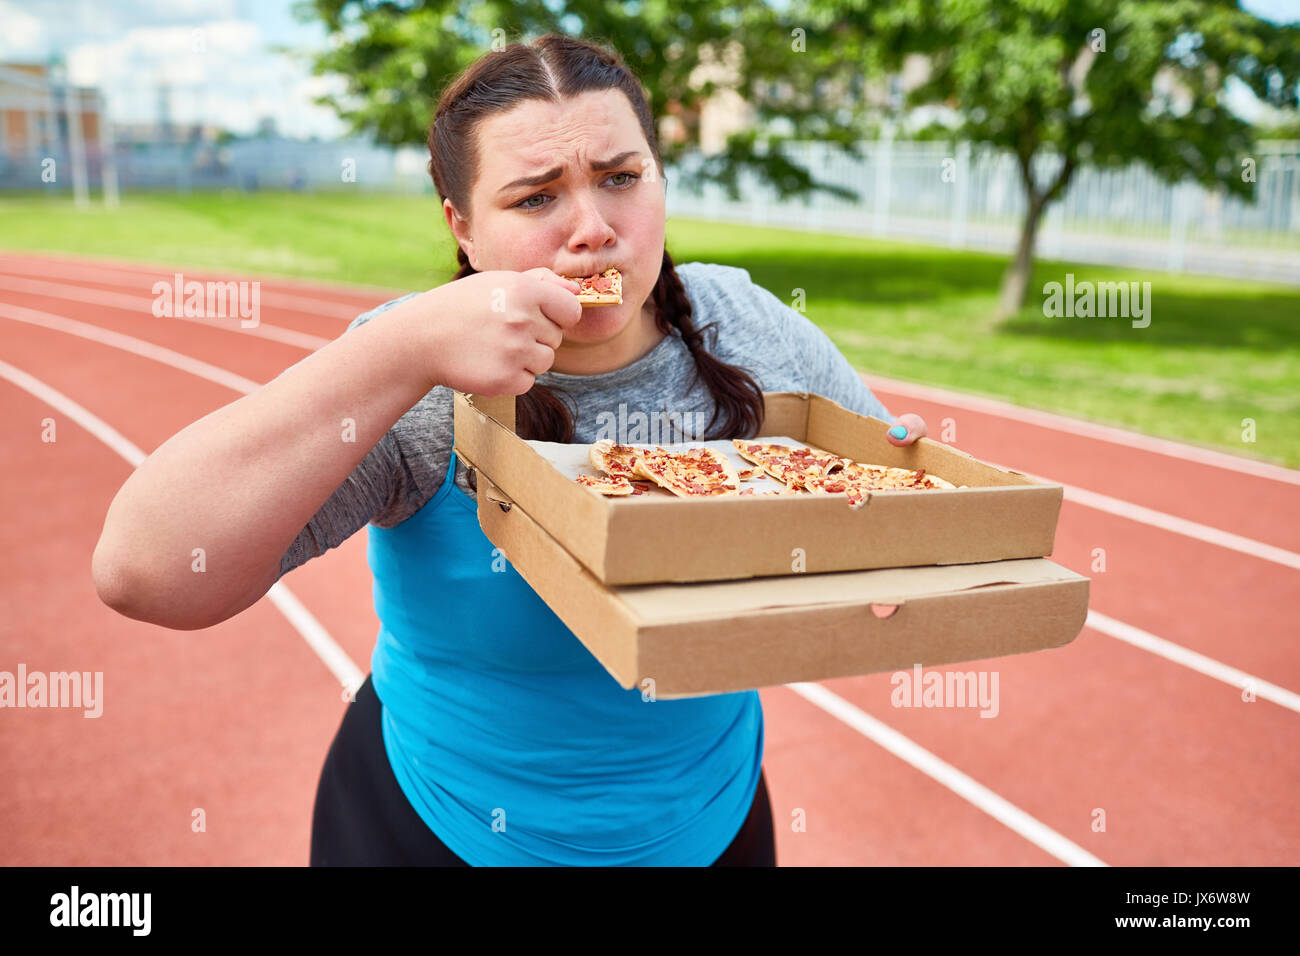 Dining after workout Stock Photo